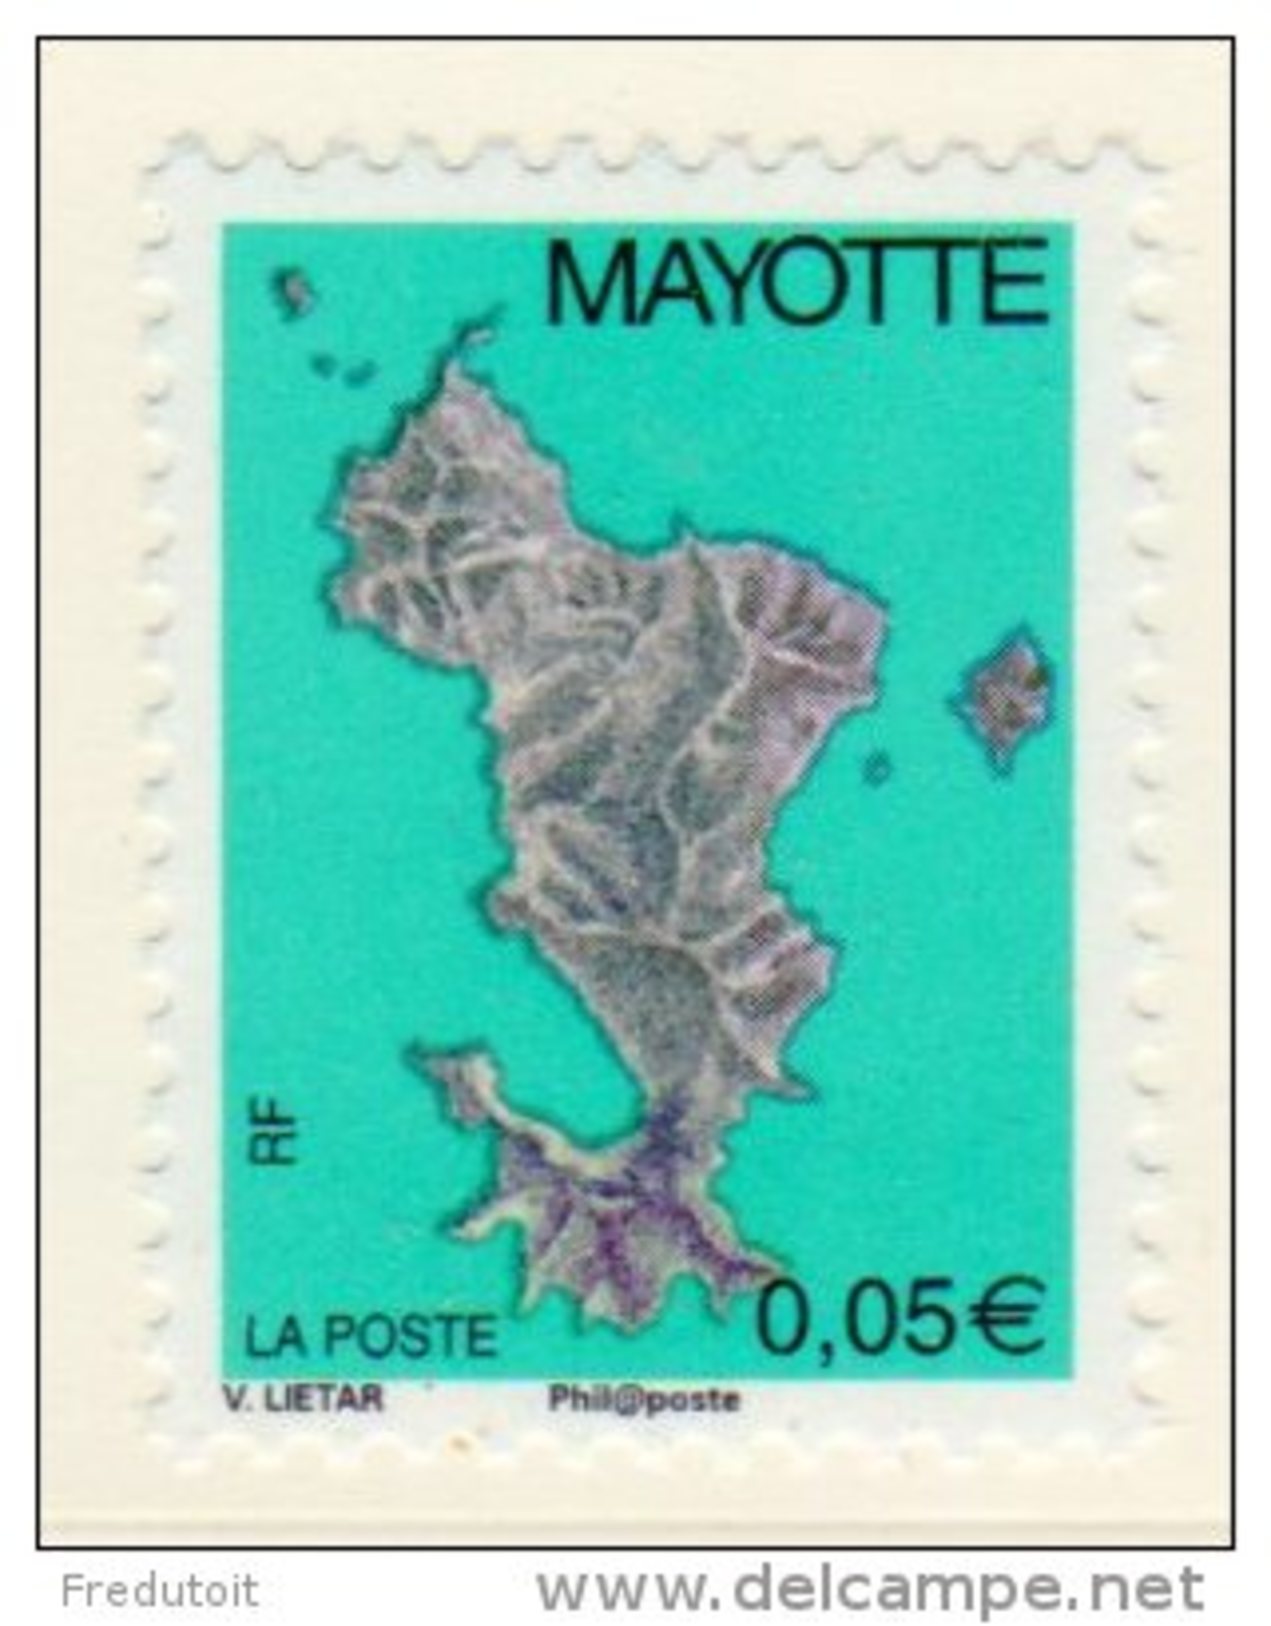 MAYOTTE -  2004 - N° 158a  ** 0,05c (phil@poste) - Neufs